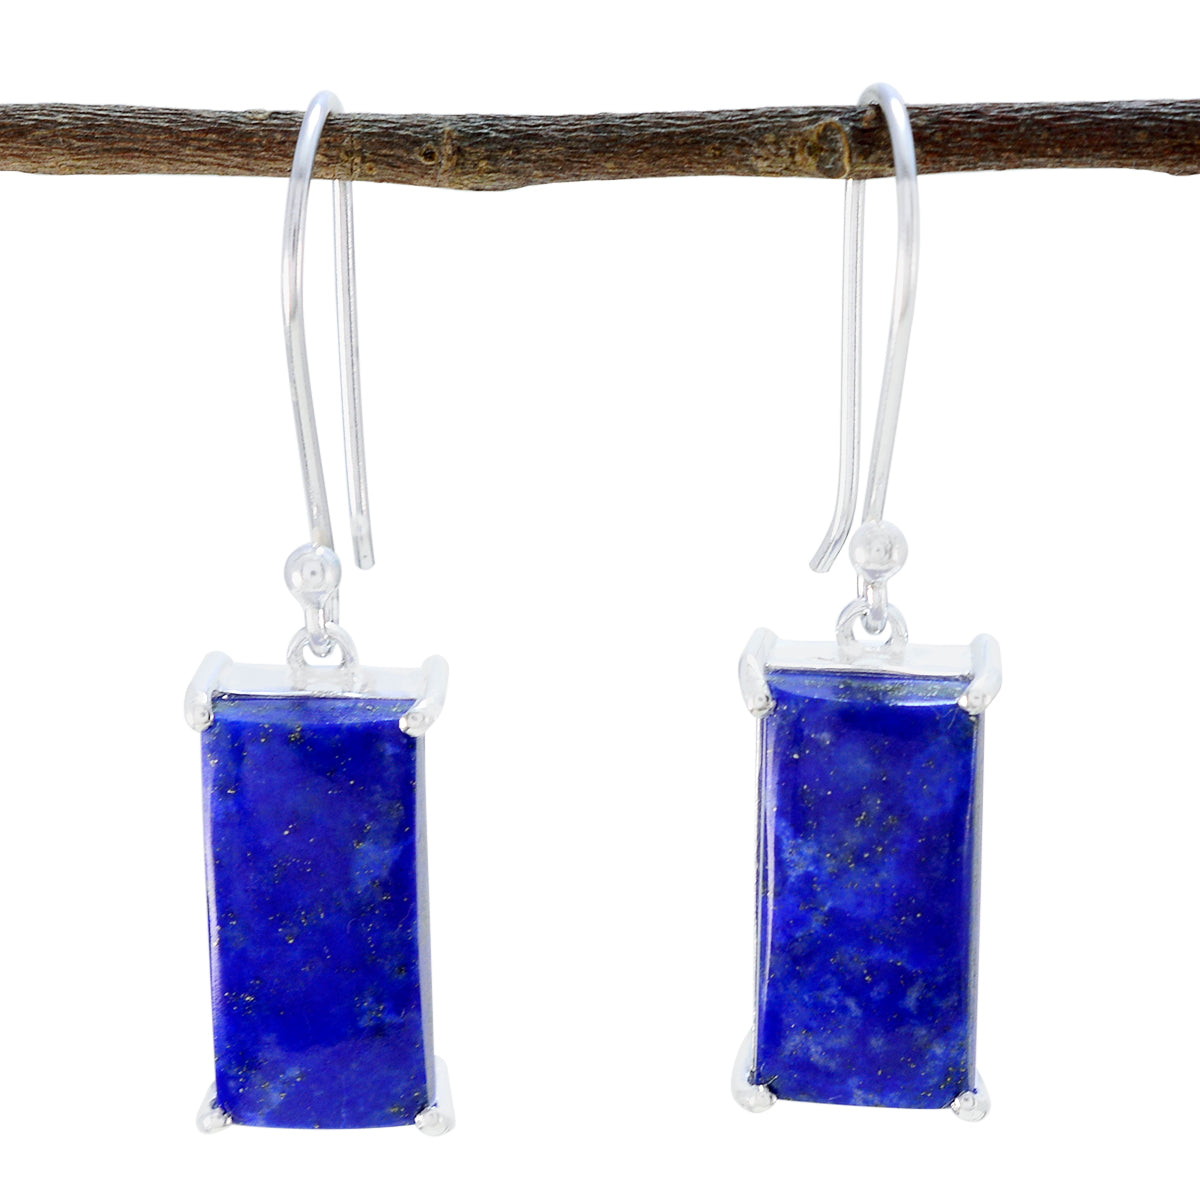 Riyo Real Gemstones Octogon Cabochon Nevy Blue Lapis Lazuli Silver Earrings gift for mother's day